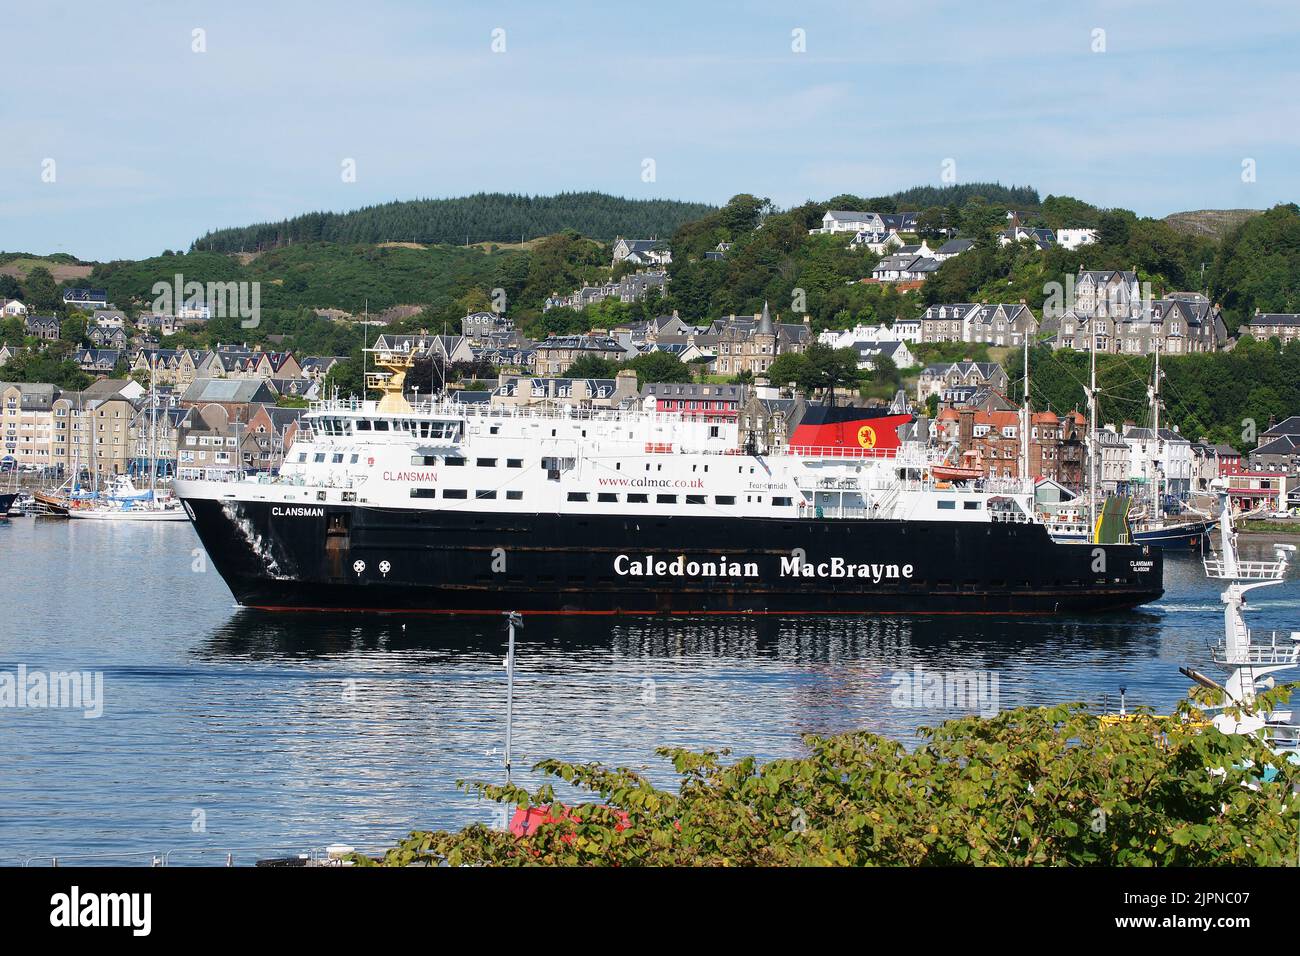 Caledonian MacBrayne inter-island ferry Clansman departing from Oban, Argyll and Bute. Stock Photo